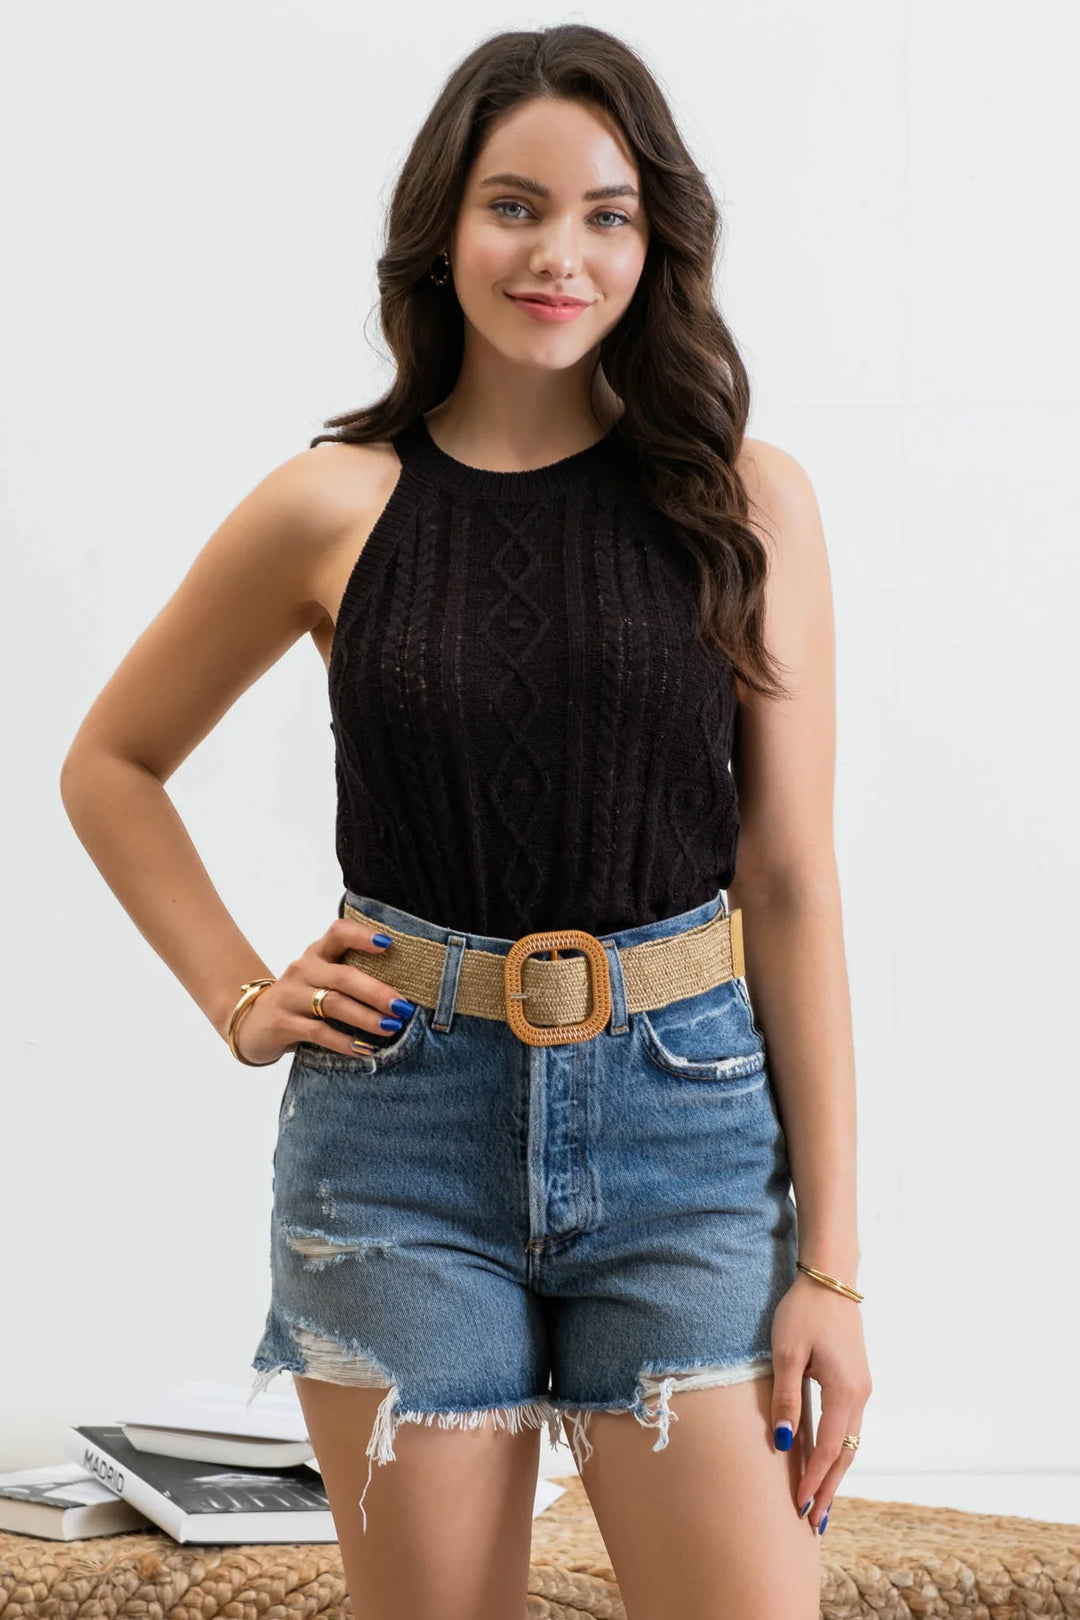 Cable Knit Halter Top